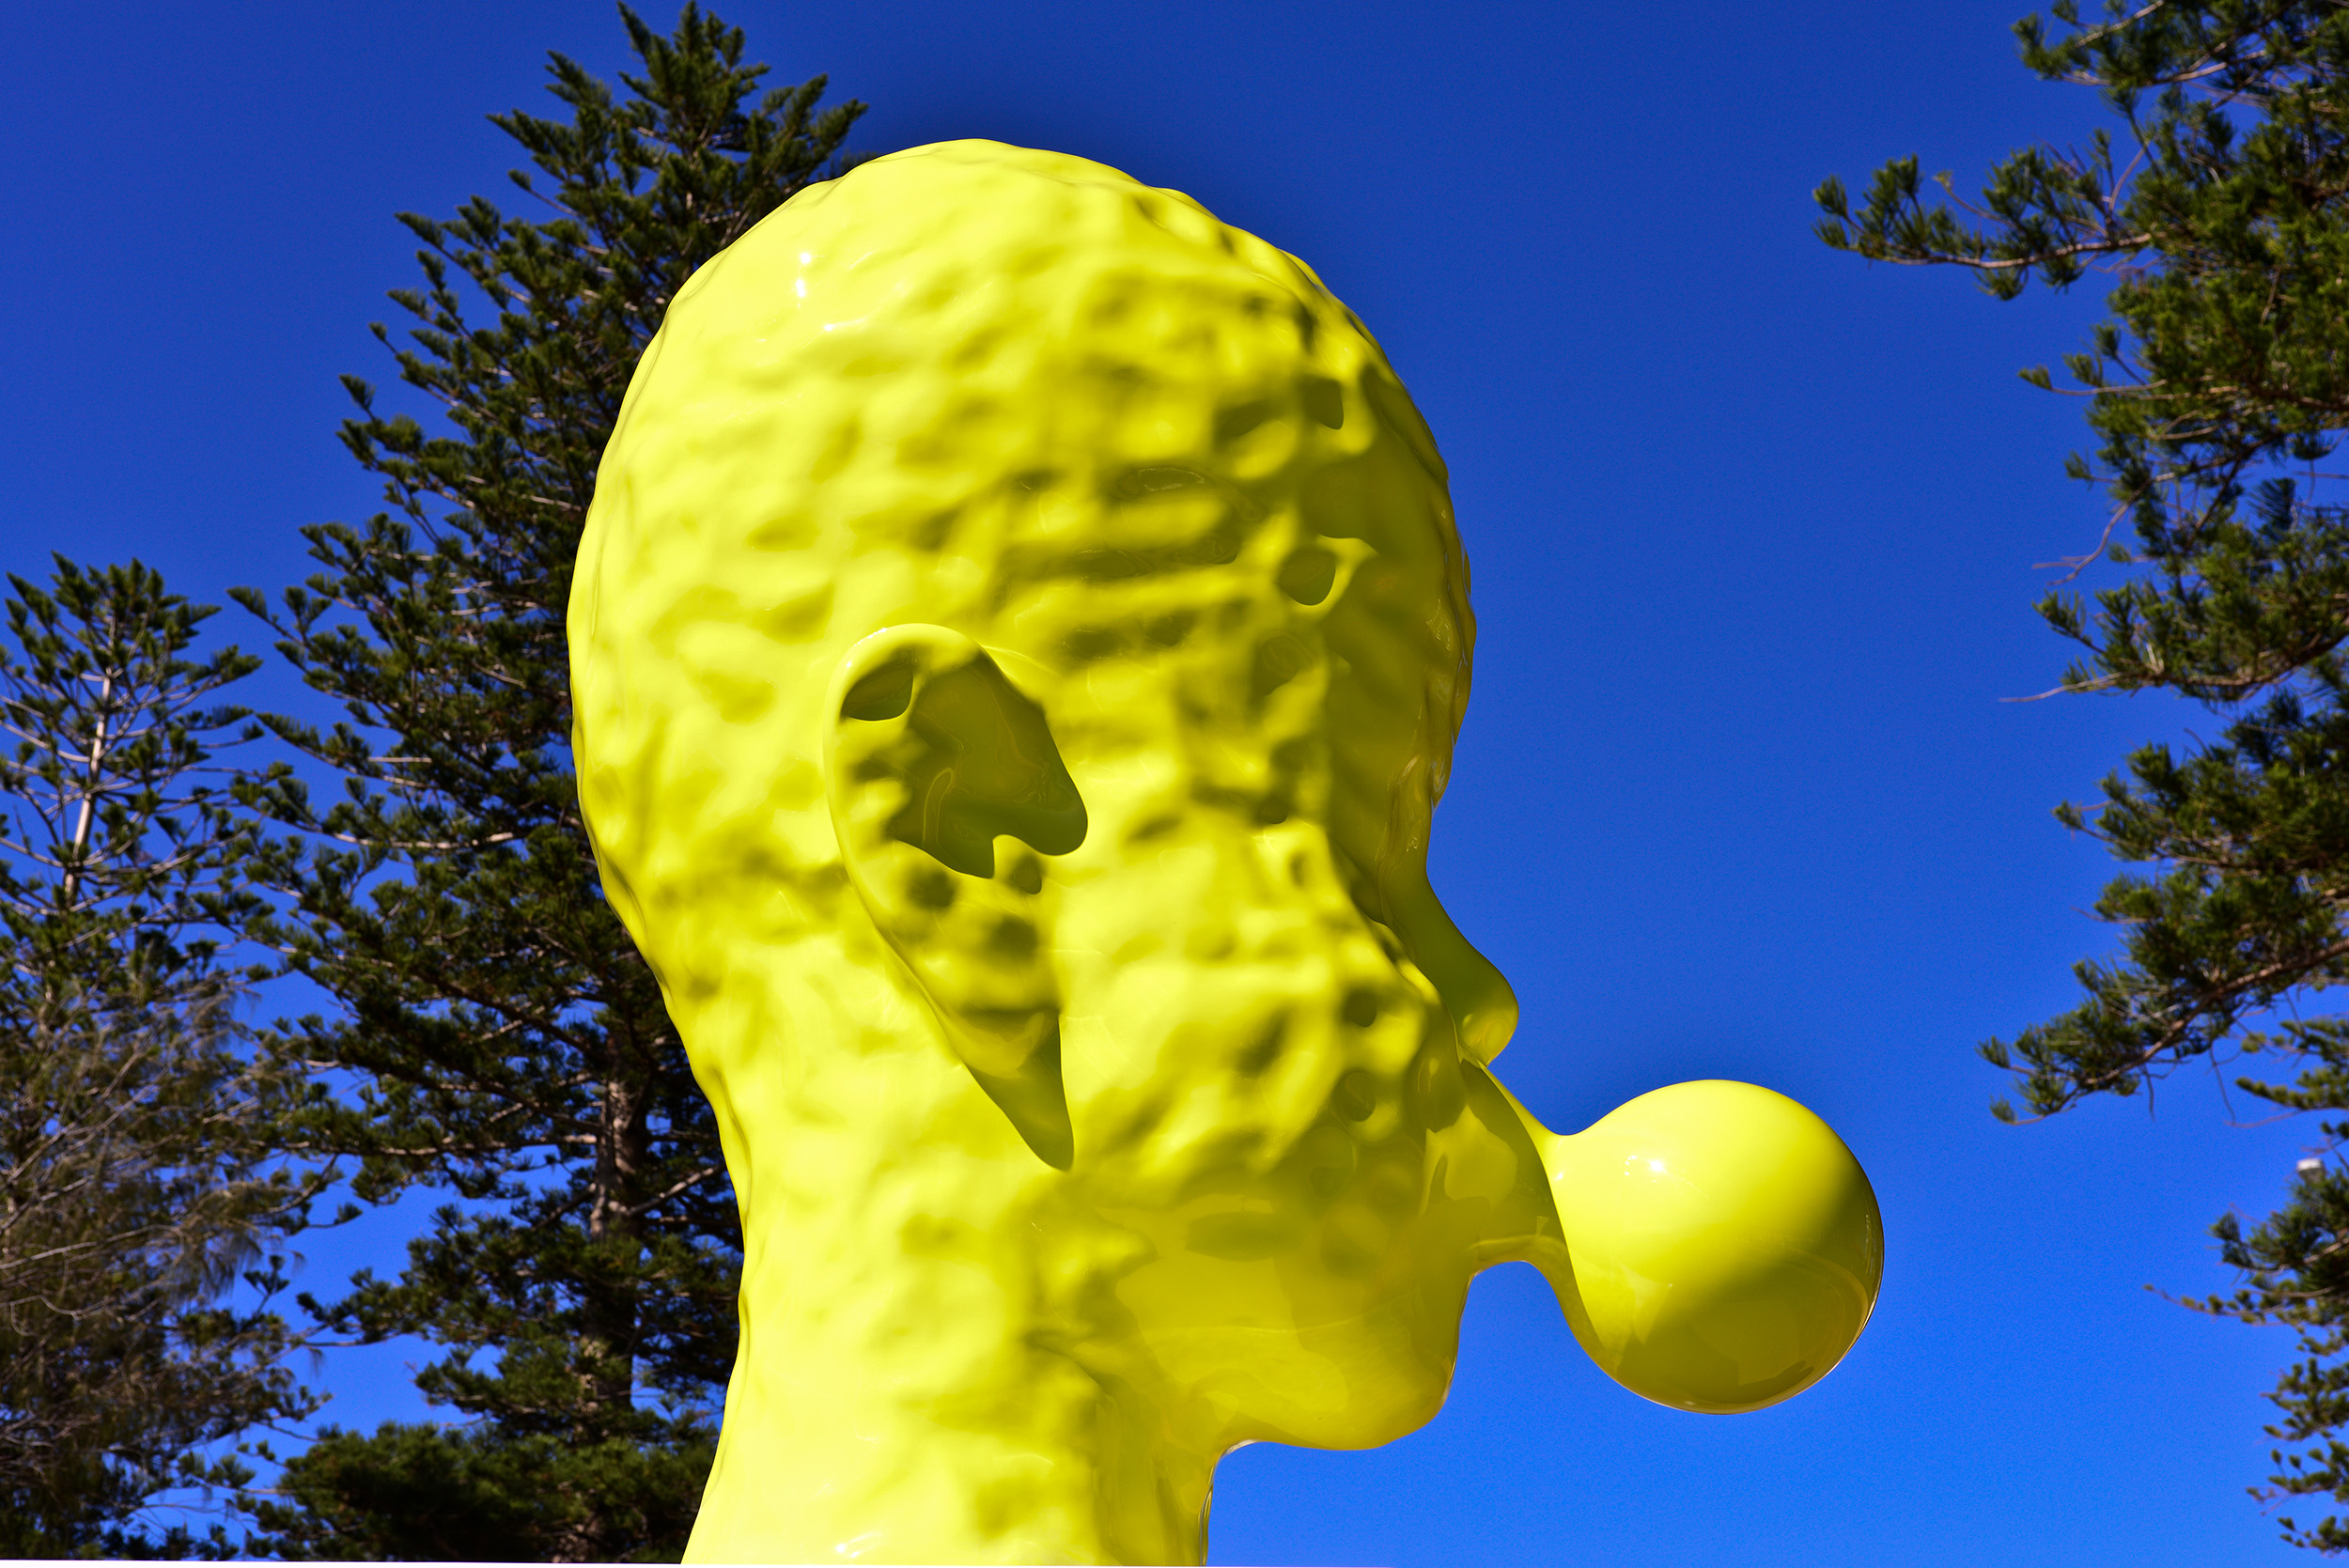 Qian Sihua Bubble No.7, Sculpture by the Sea, Cottesloe 2016. Photo Clyde Yee